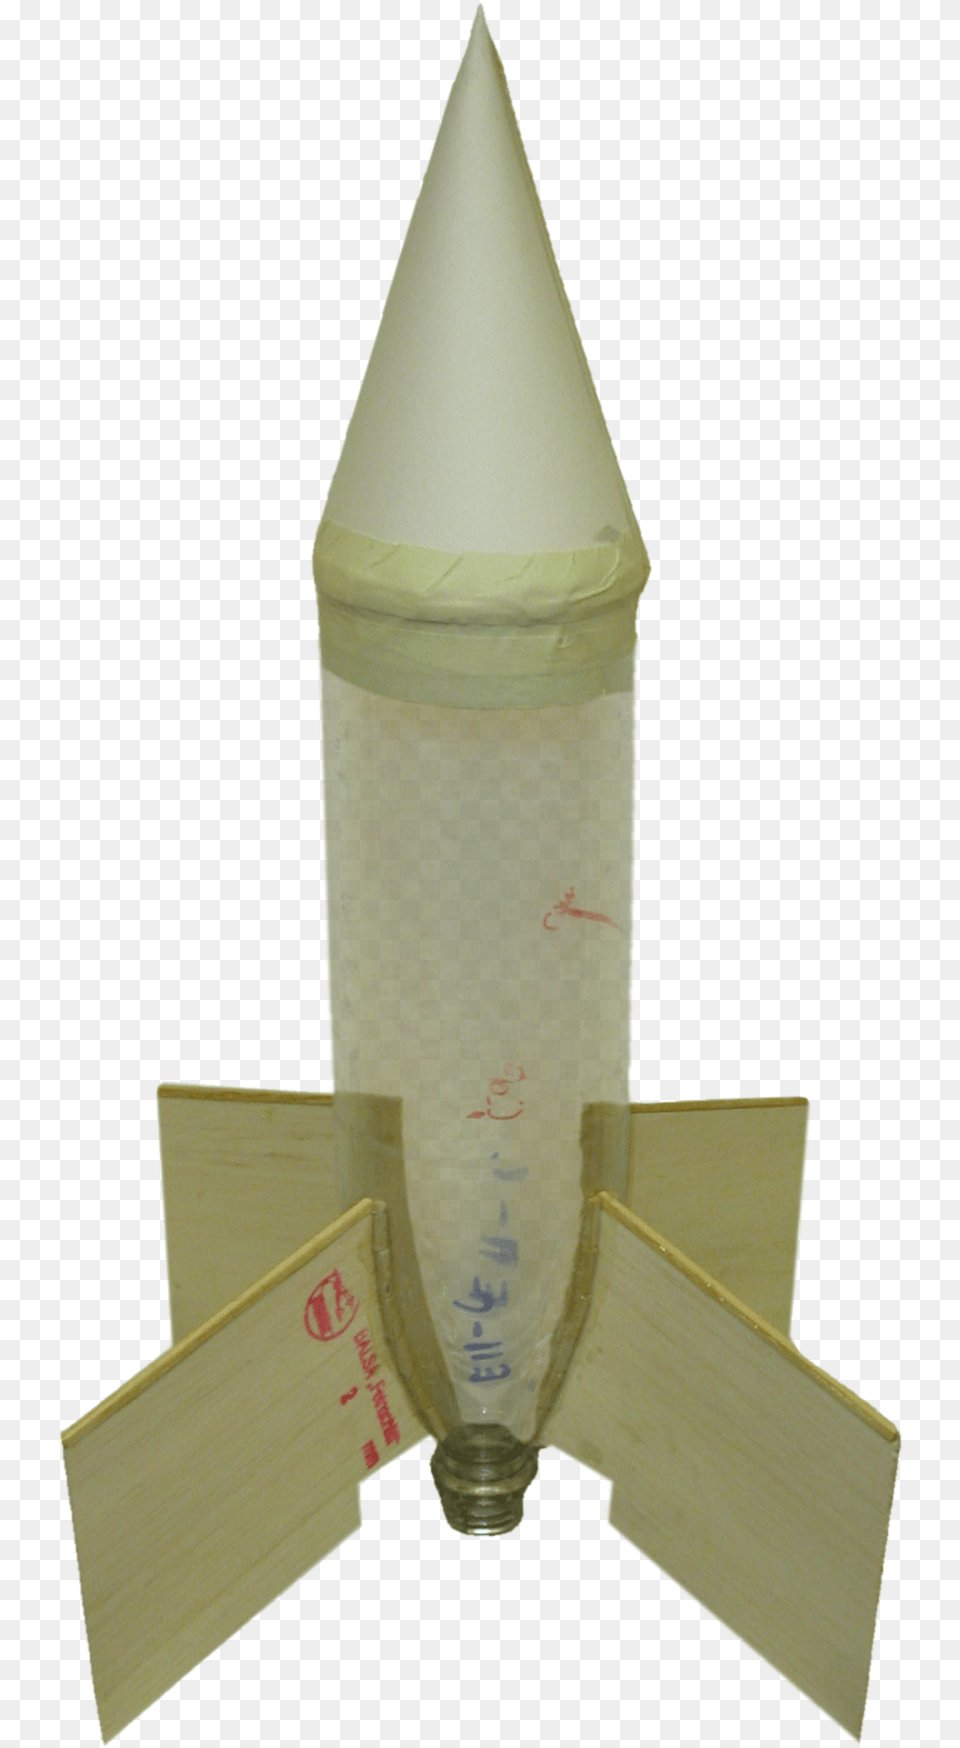 Empty Water Rocket Water Bottle Rocket Design, Cup, Mortar Shell, Weapon Png Image